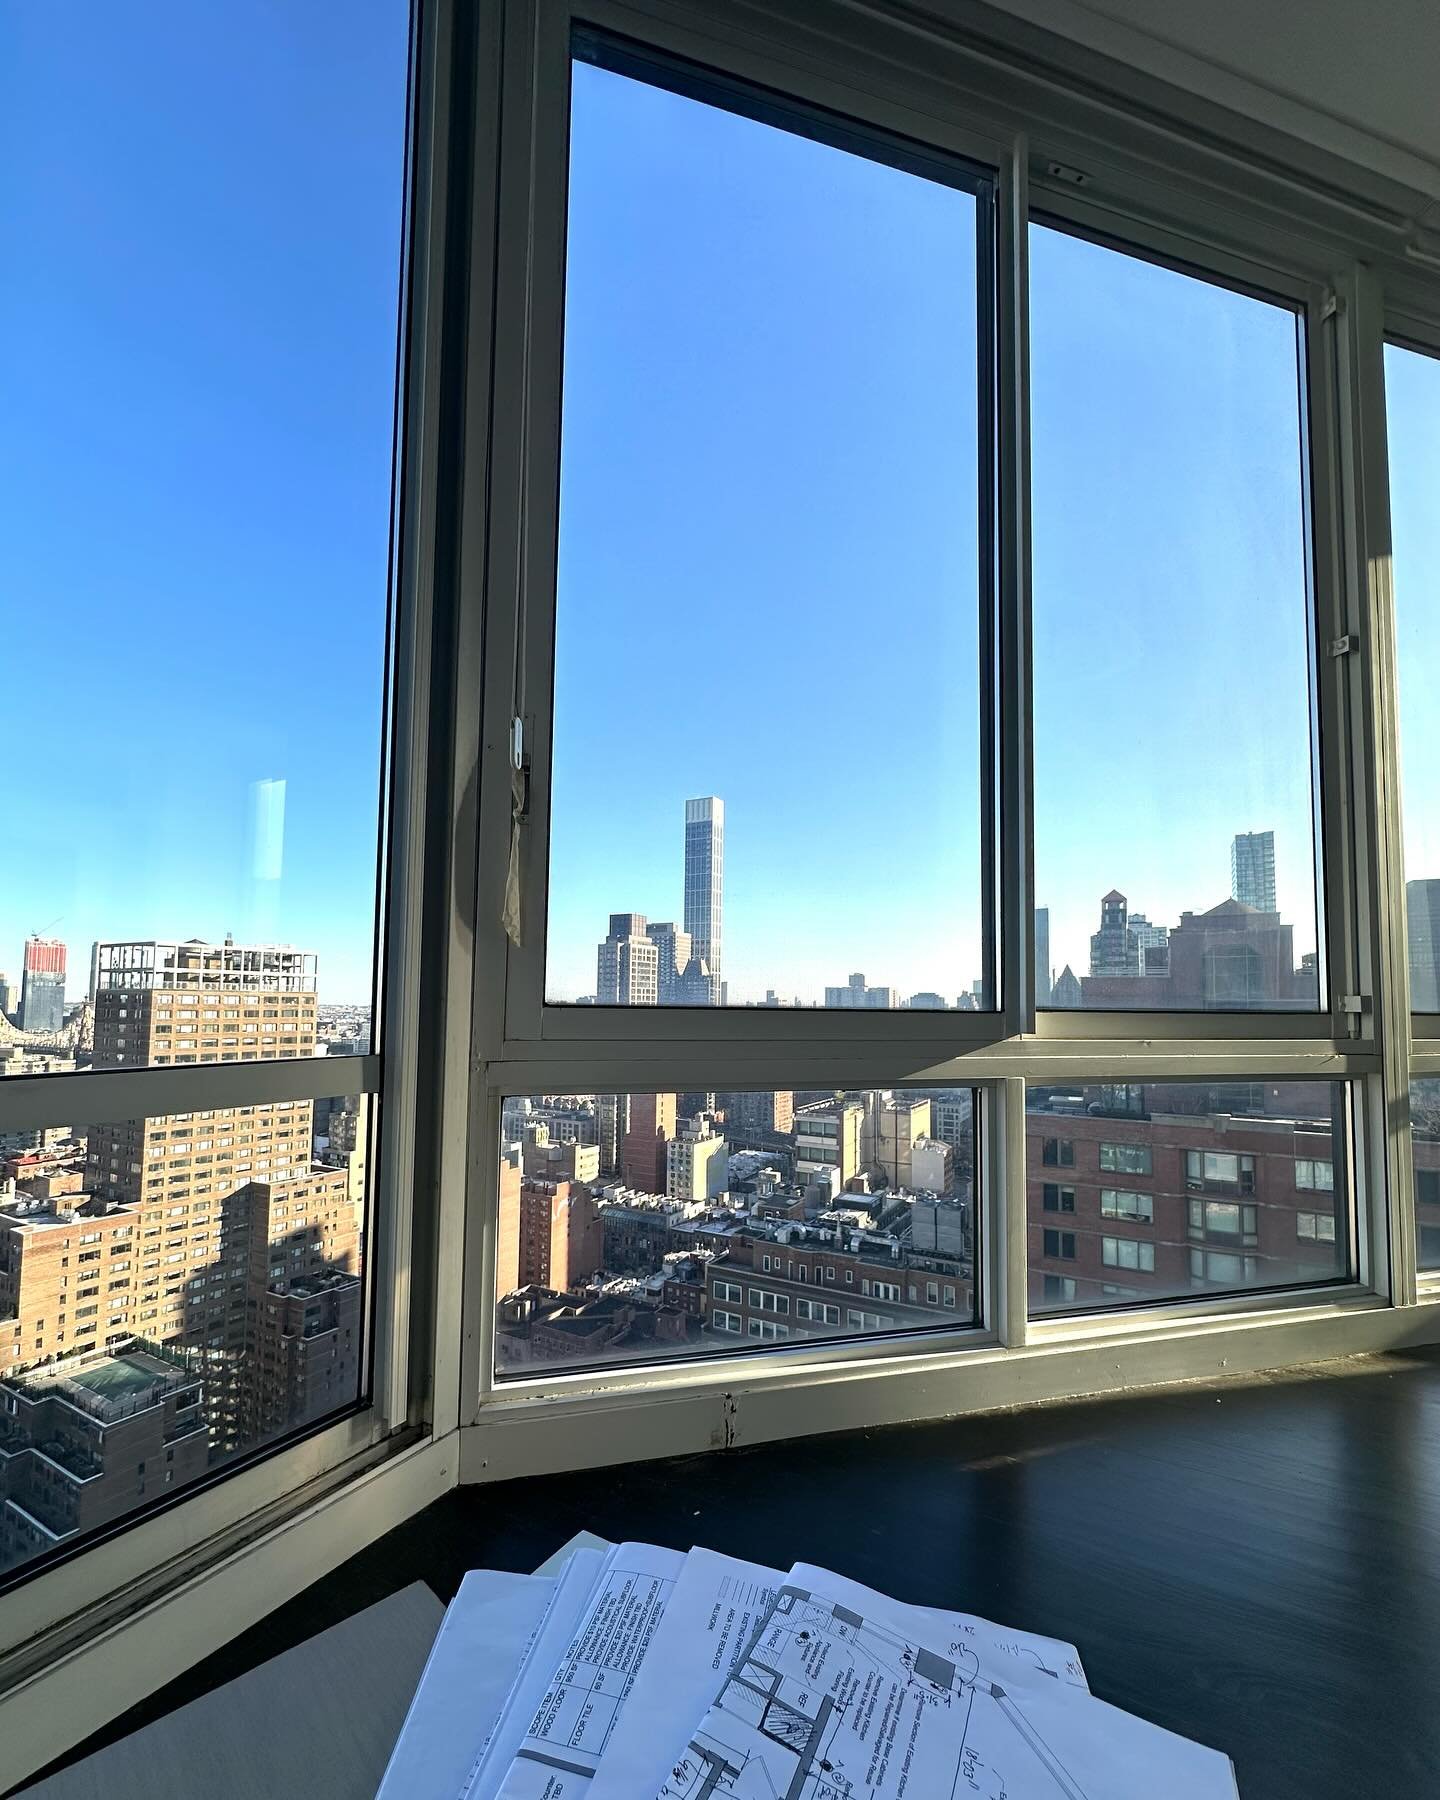 Firstly, we admire the view on the 32nd floor, then start the renovation! 

We are chipping away at an apartment

-This is a 2 bedroom apartment renovation&hellip; under construction .. more to follow on this partial gut .. this apartment will have s